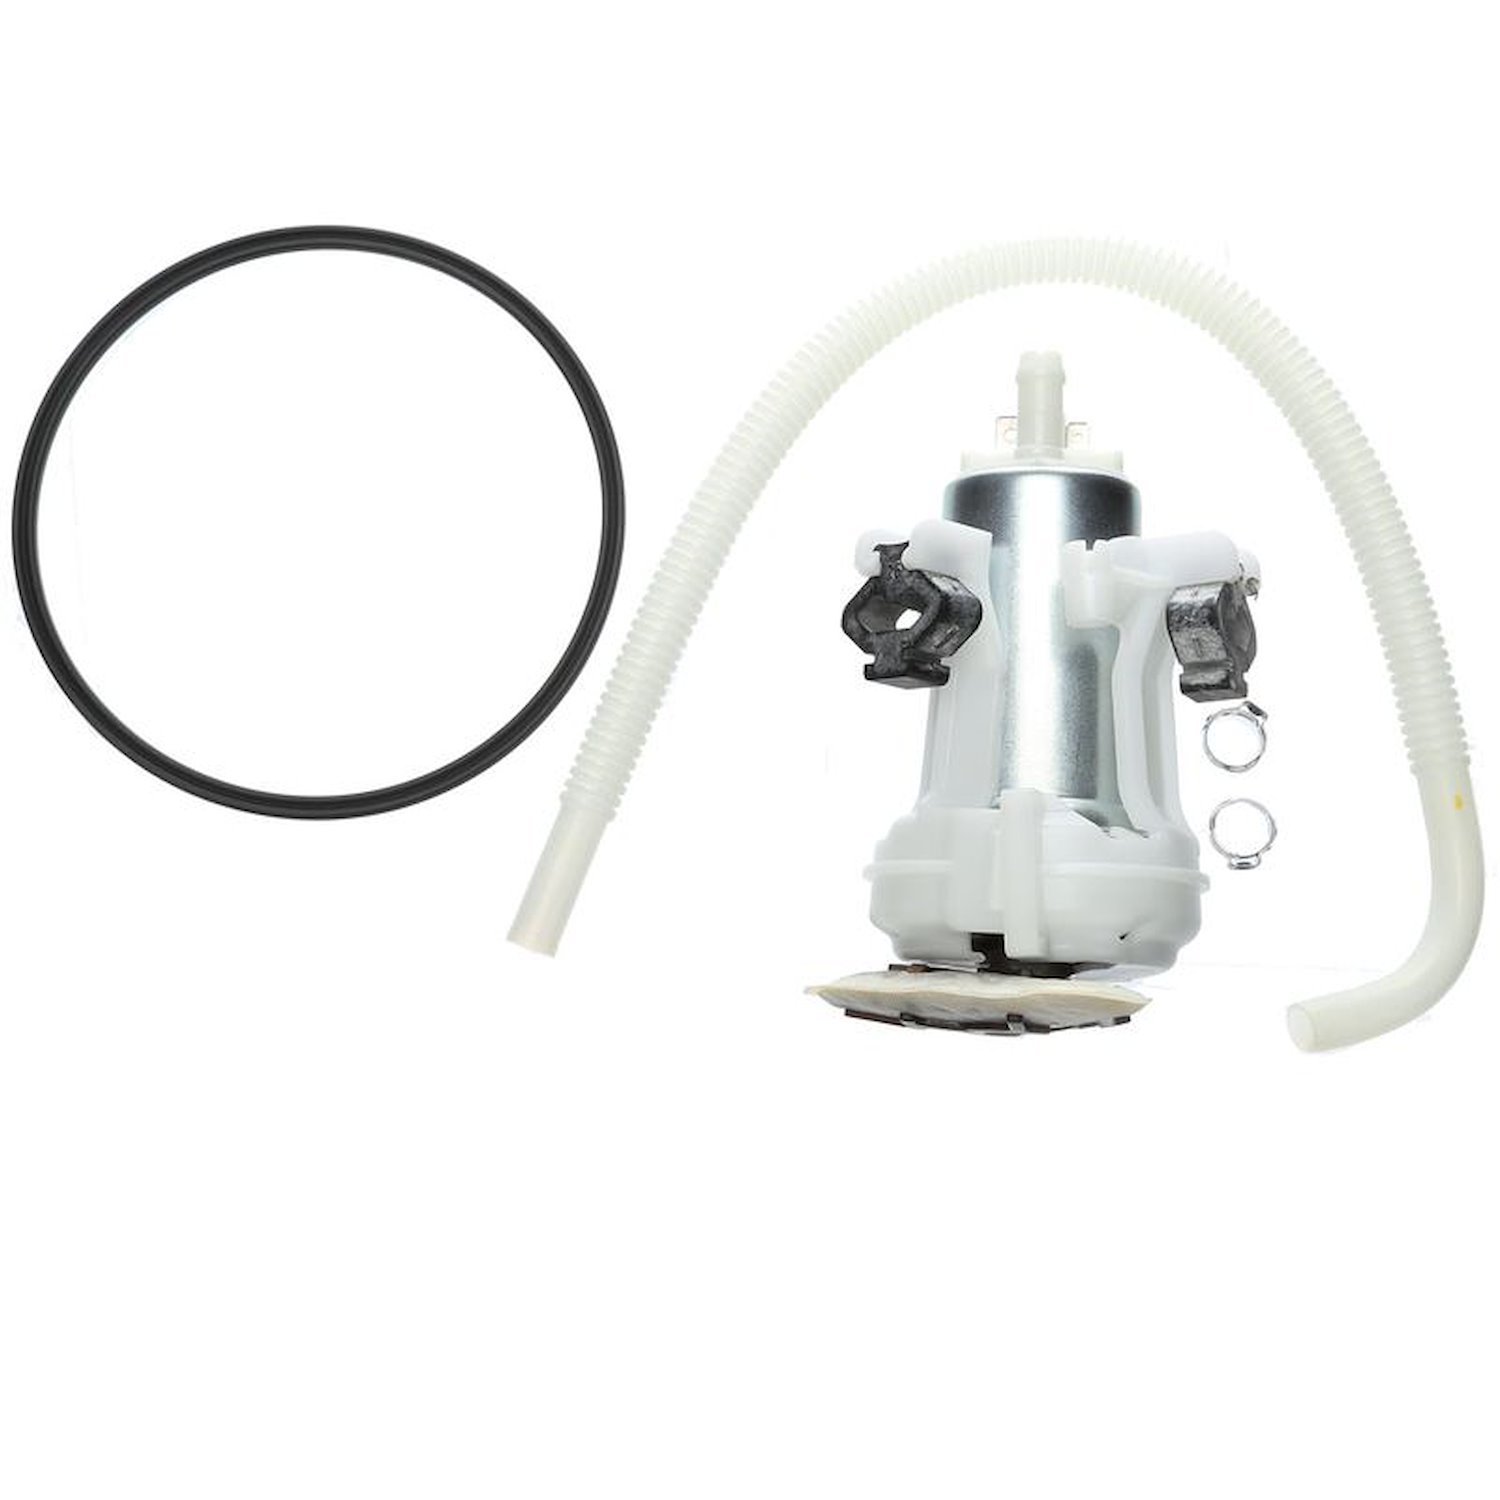 OE Replacement Electric Fuel Pump and Strainer Set